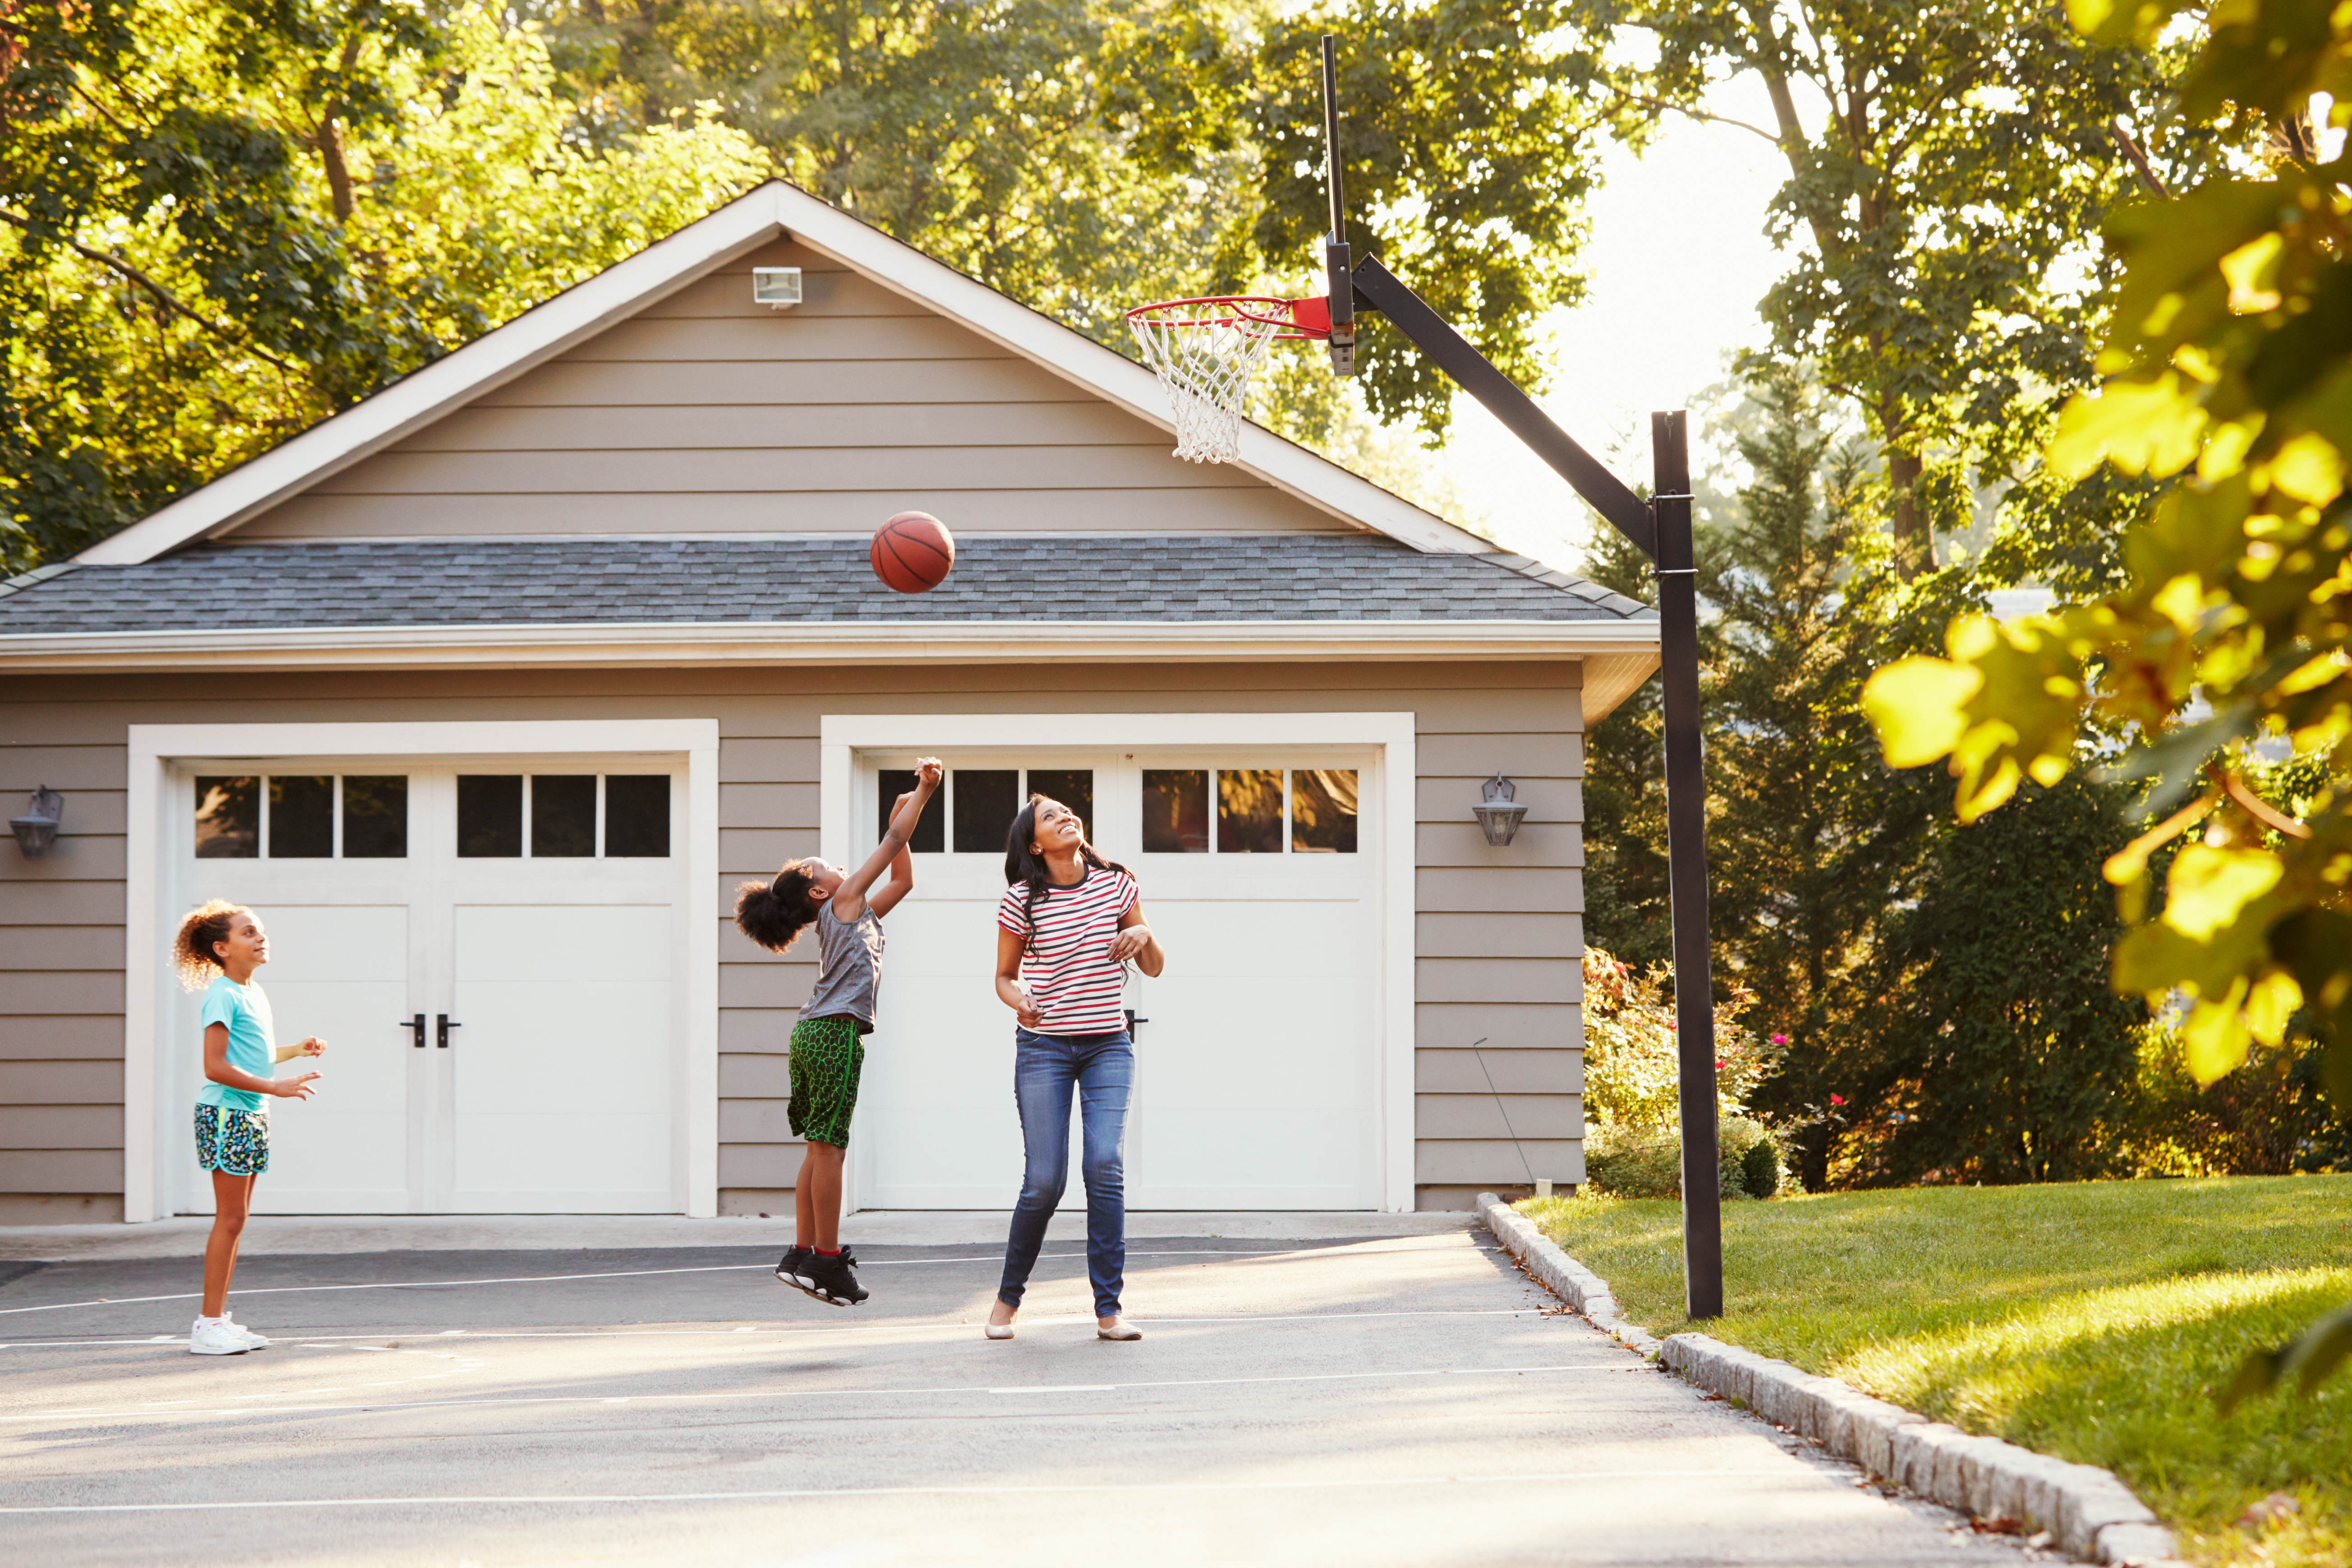 Family playing basketball on a hoop in their driveway